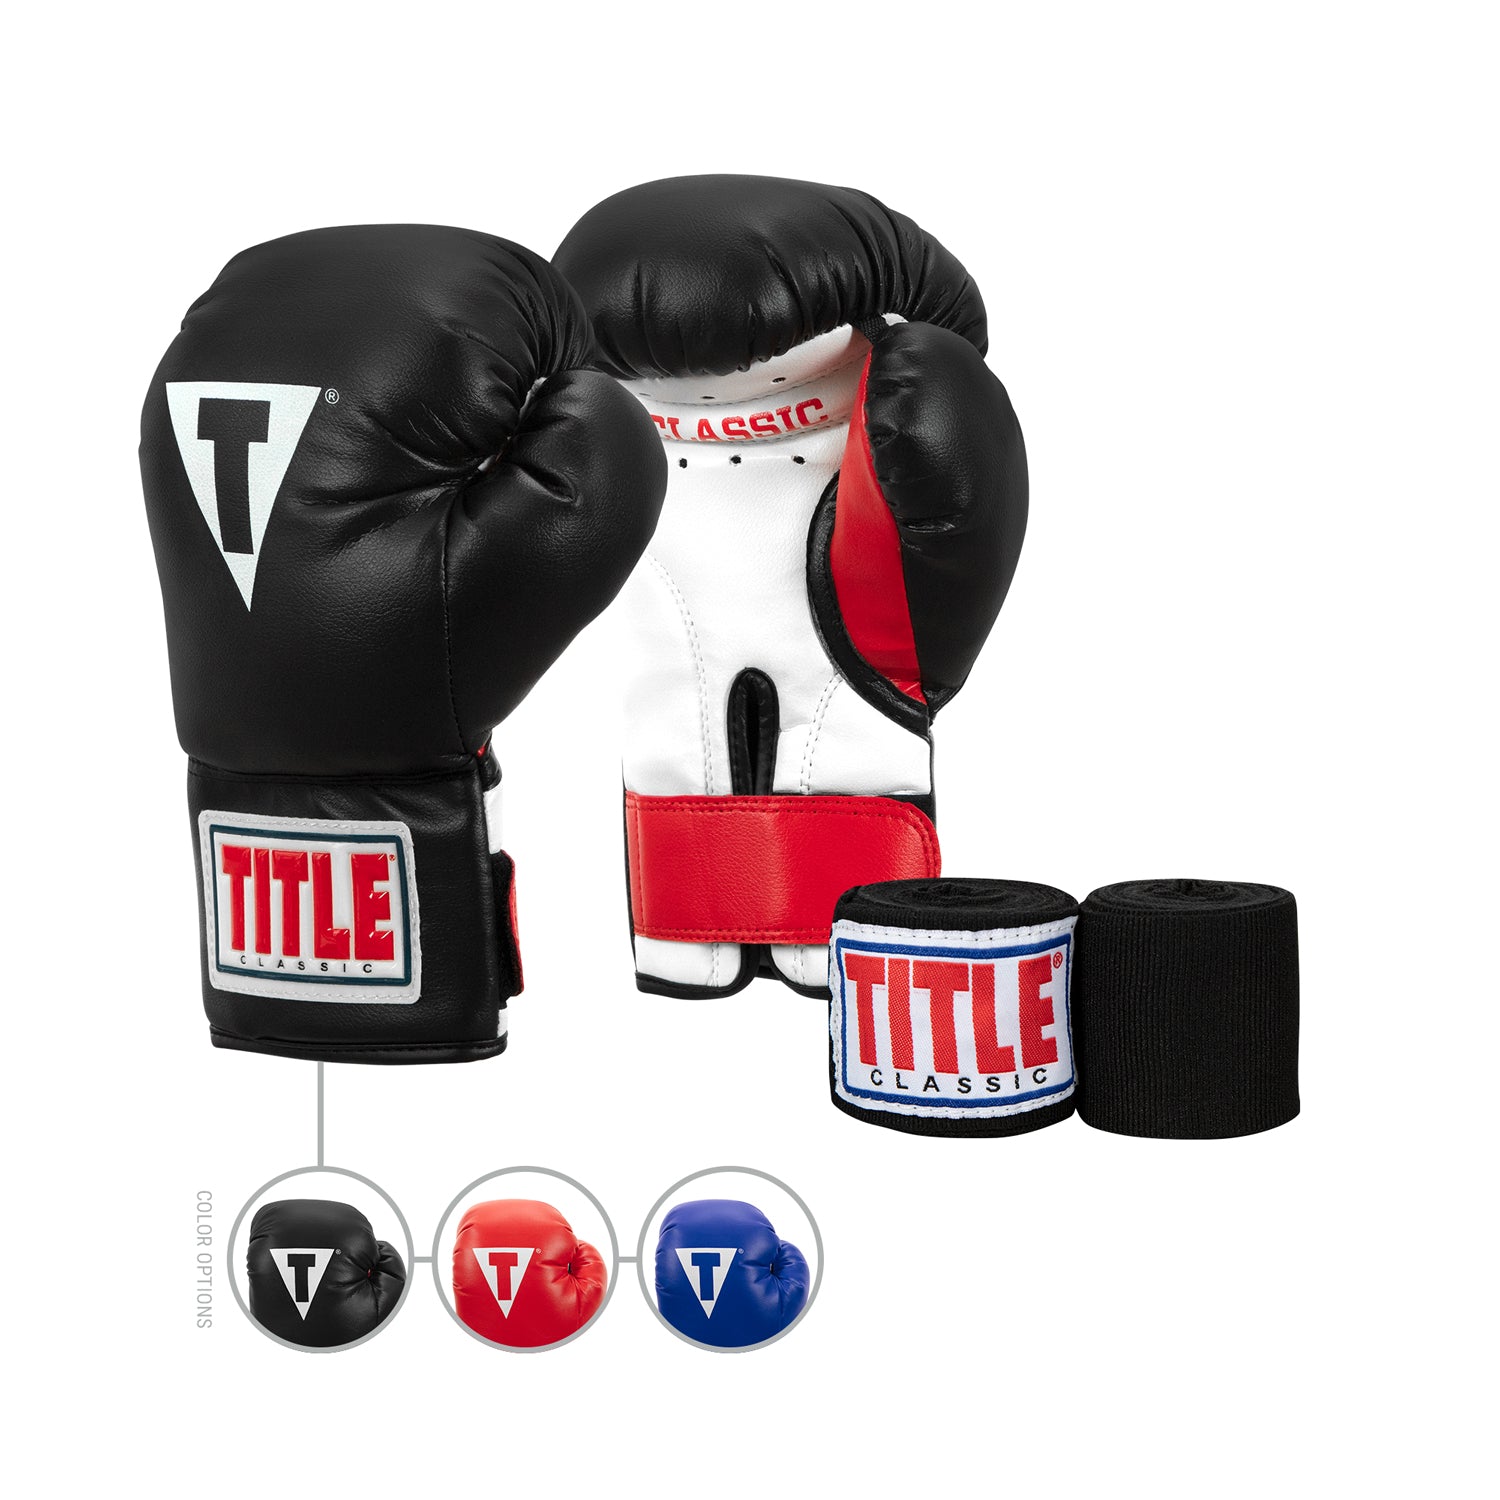 TITLE Classic Youth Boxing Gloves and Wraps Bundle